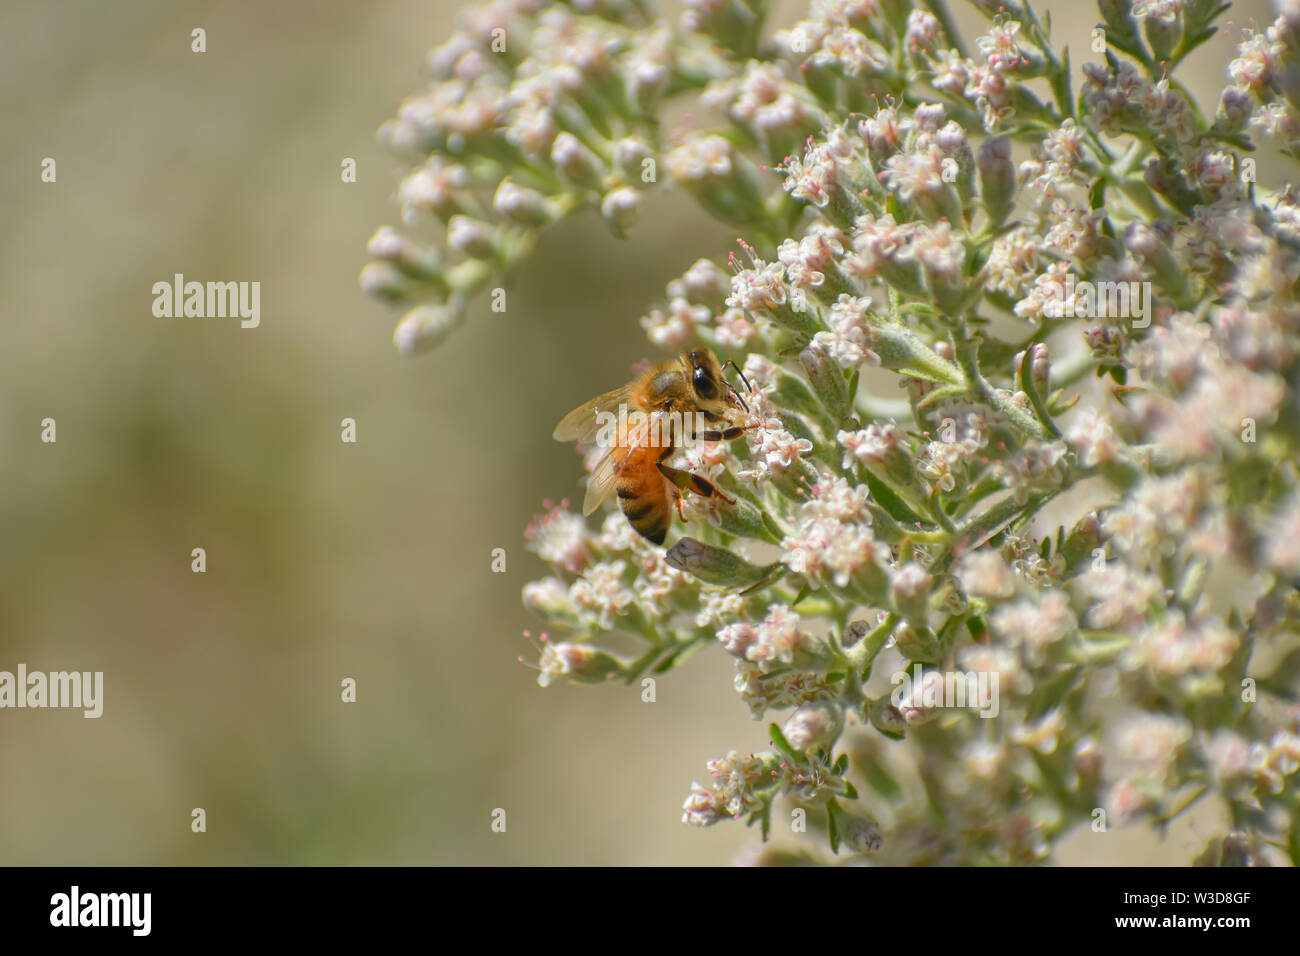 Honey Bee on the white blossoms of a St. Catherine's Lace plant. Stock Photo